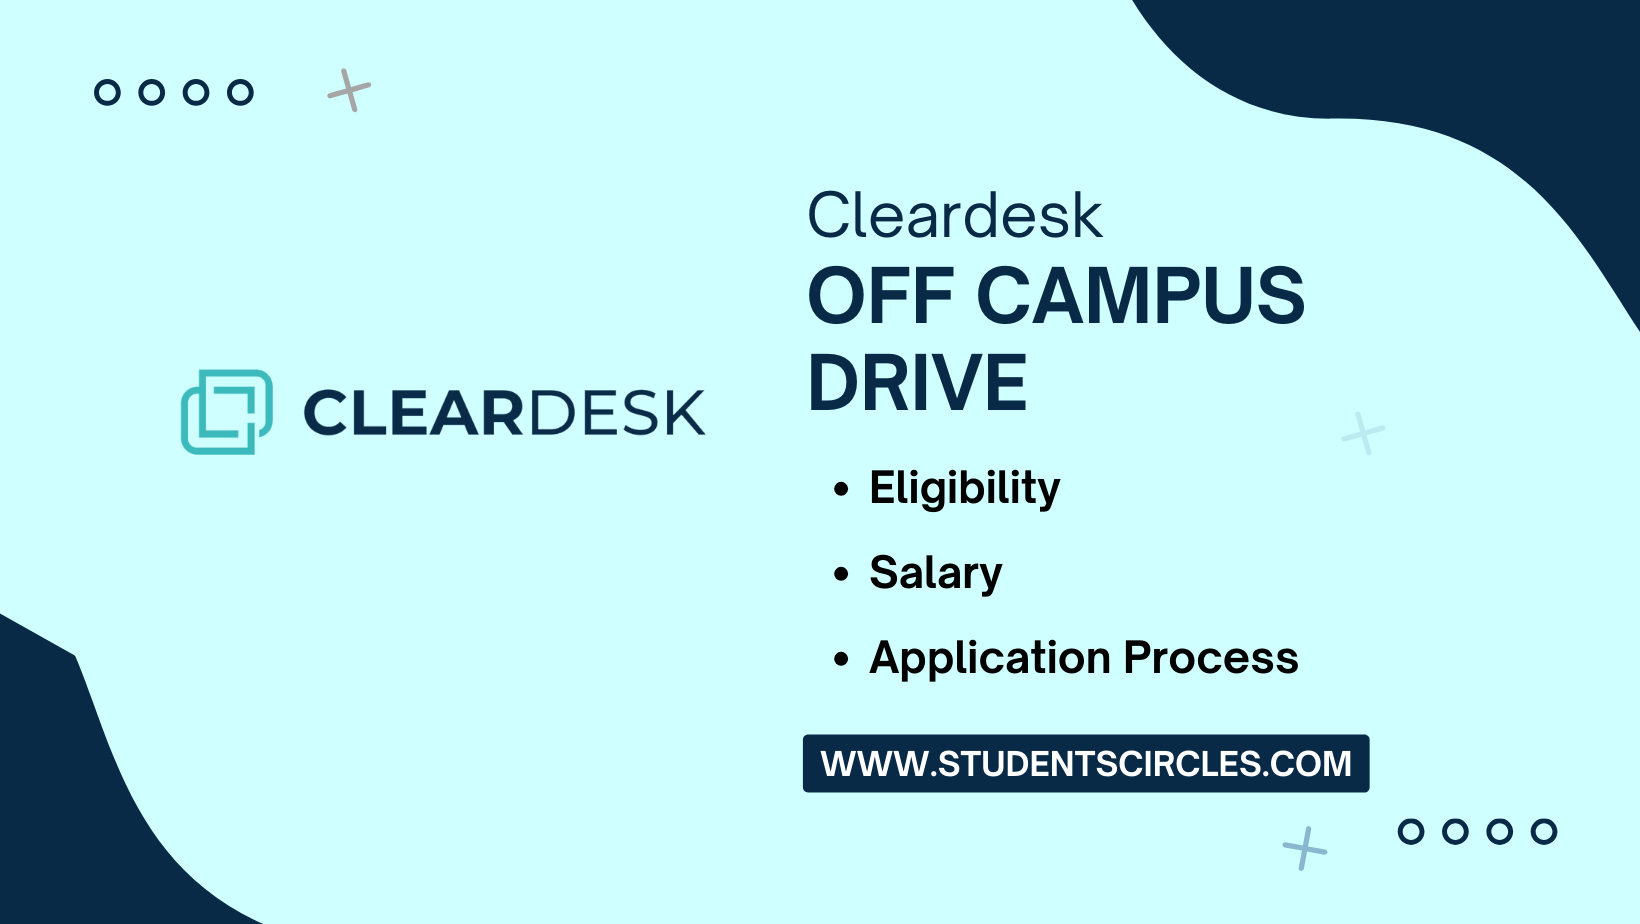 Cleardesk Off Campus Drive